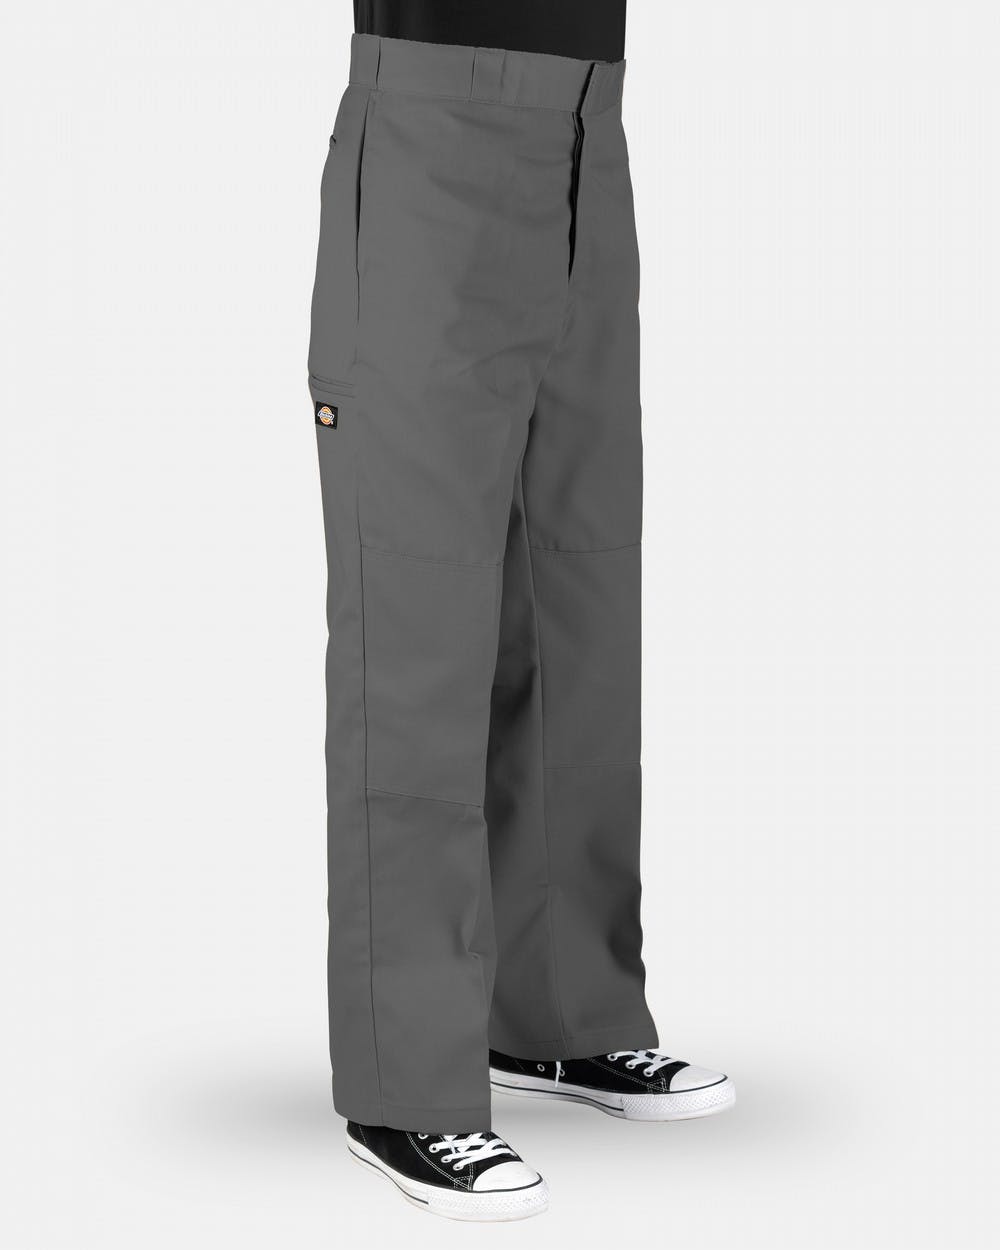 Dickies Loose Fit Double Knee Twill Work Pants - Charcoal - 029311711351